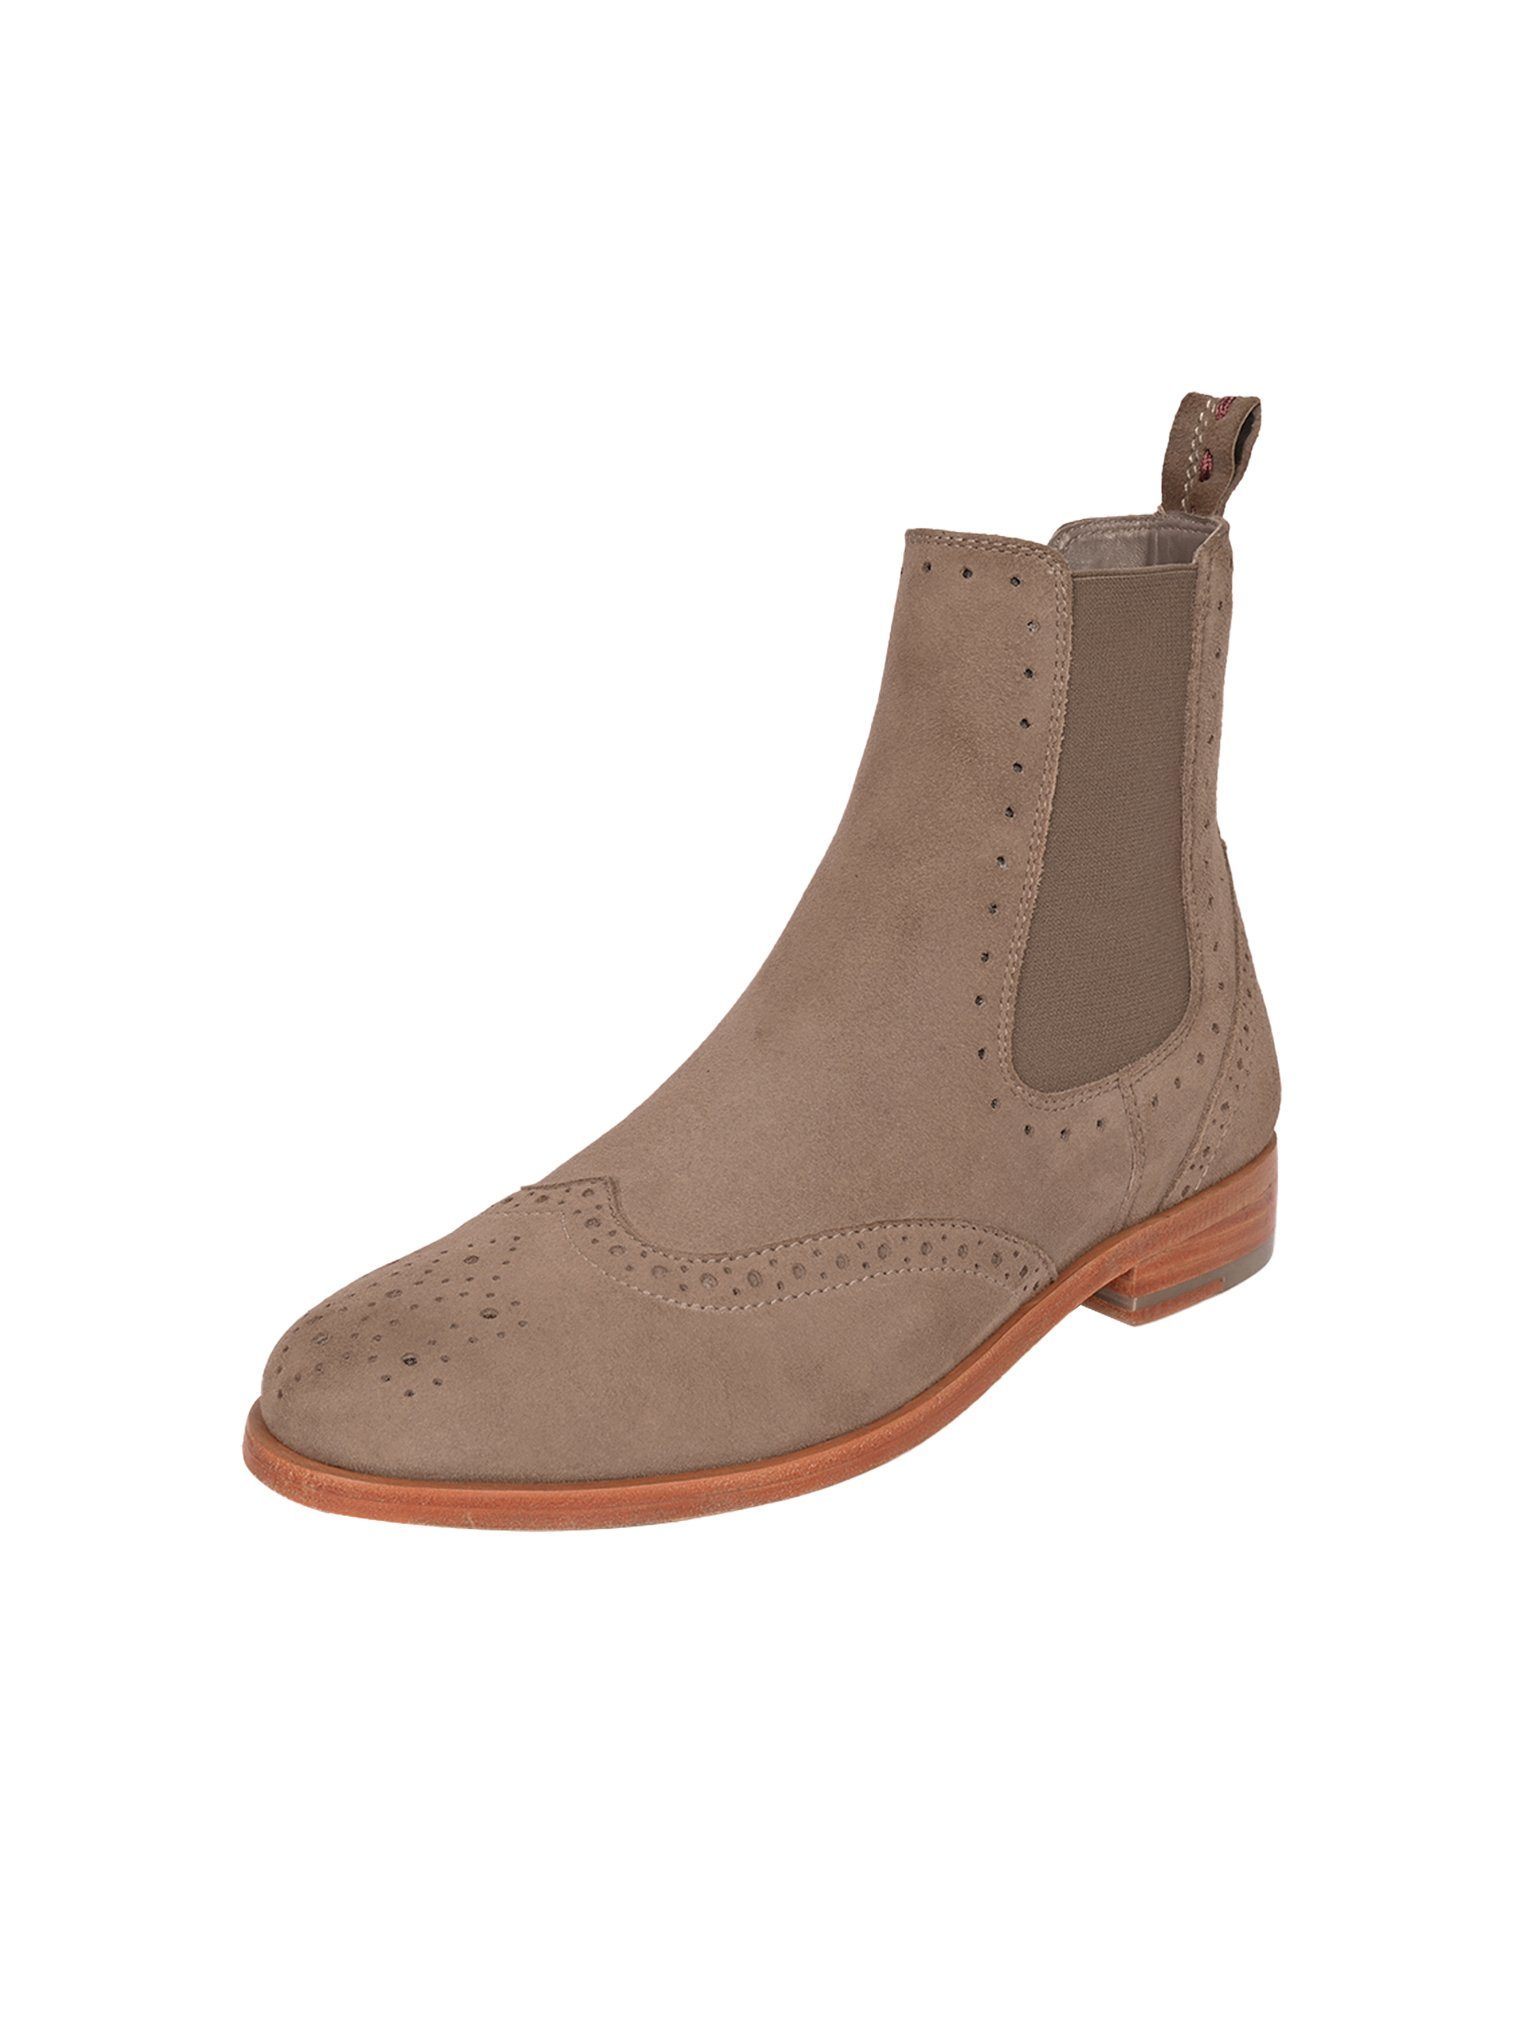 CRICKIT Taupe Chelseaboots HELEN